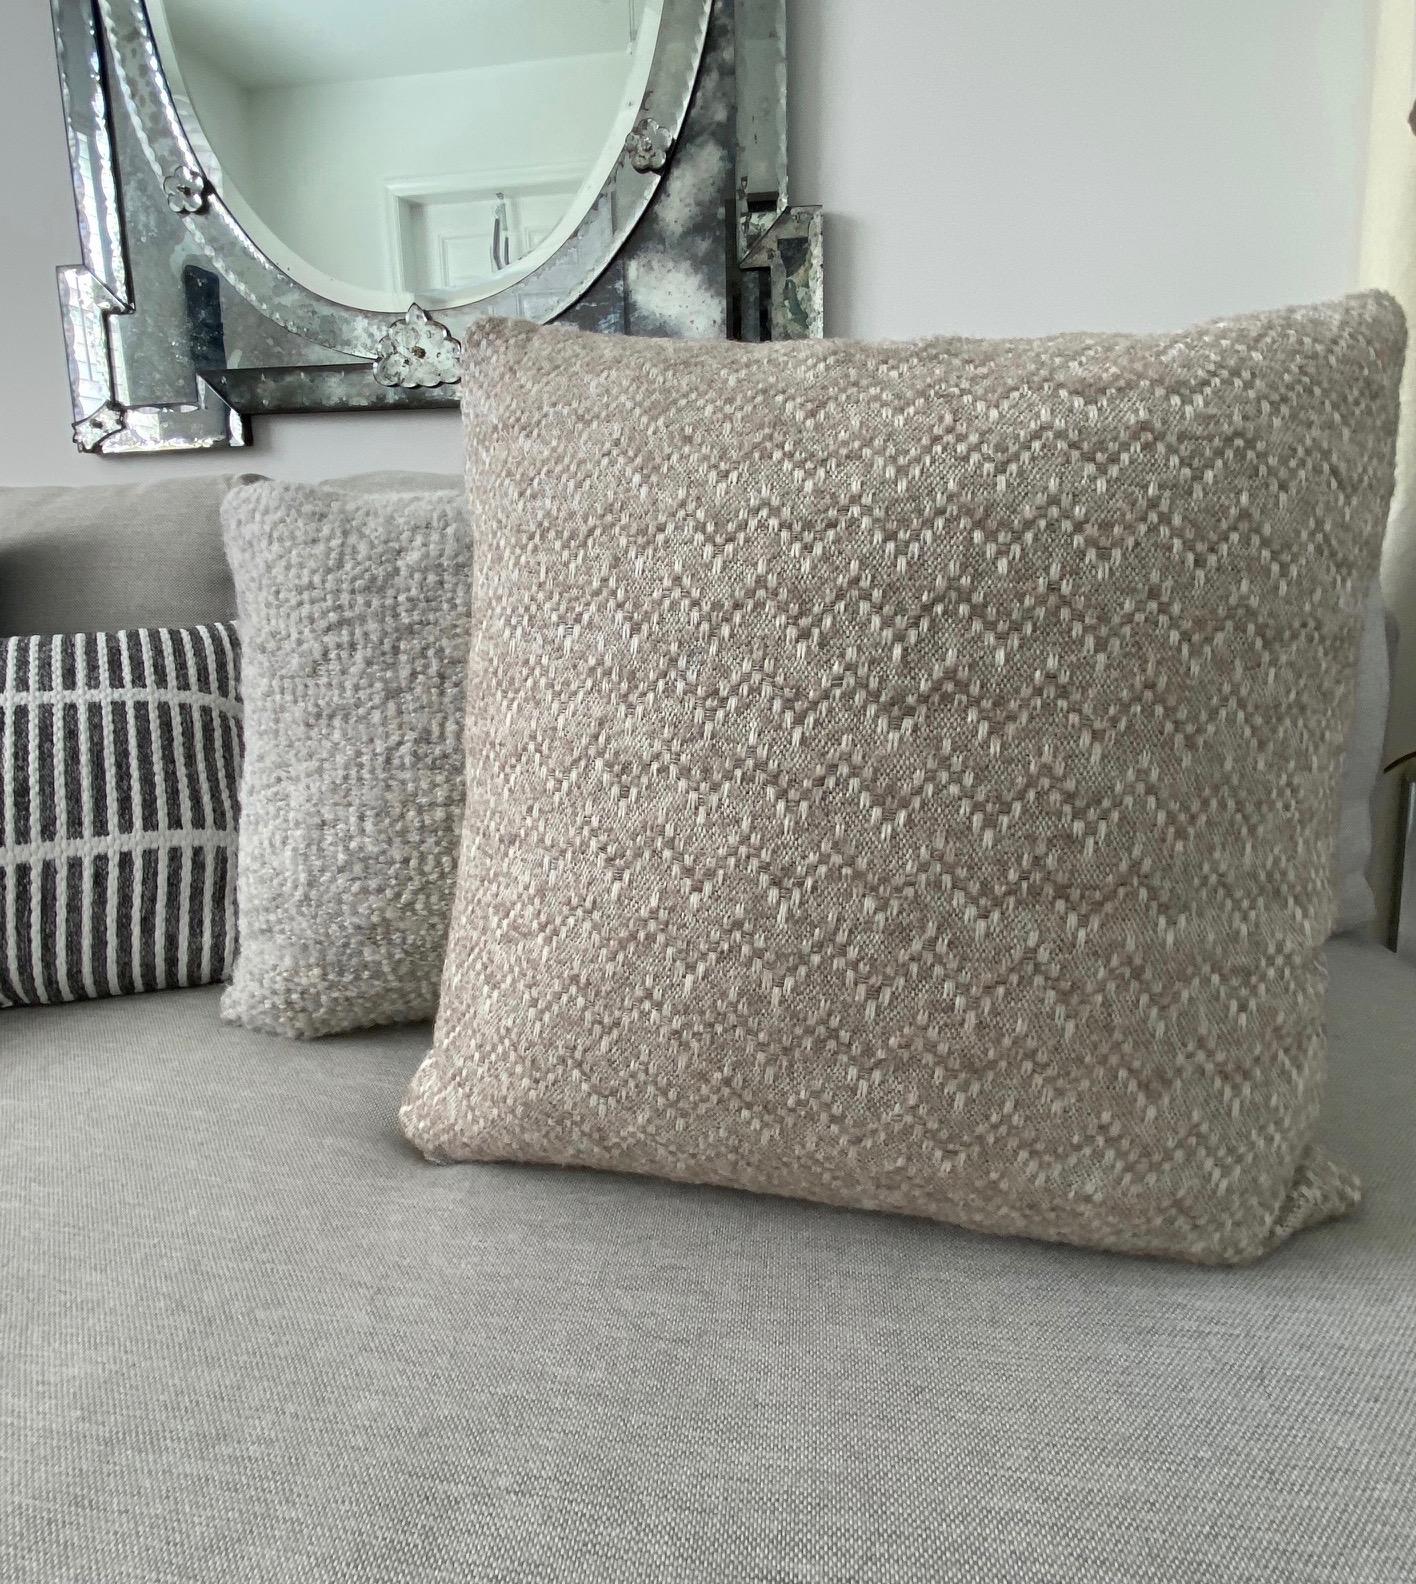 Pierre Frey Organic Wool, Alpaca, and Mohair Chevron Luxe Pillow in Taupe 3